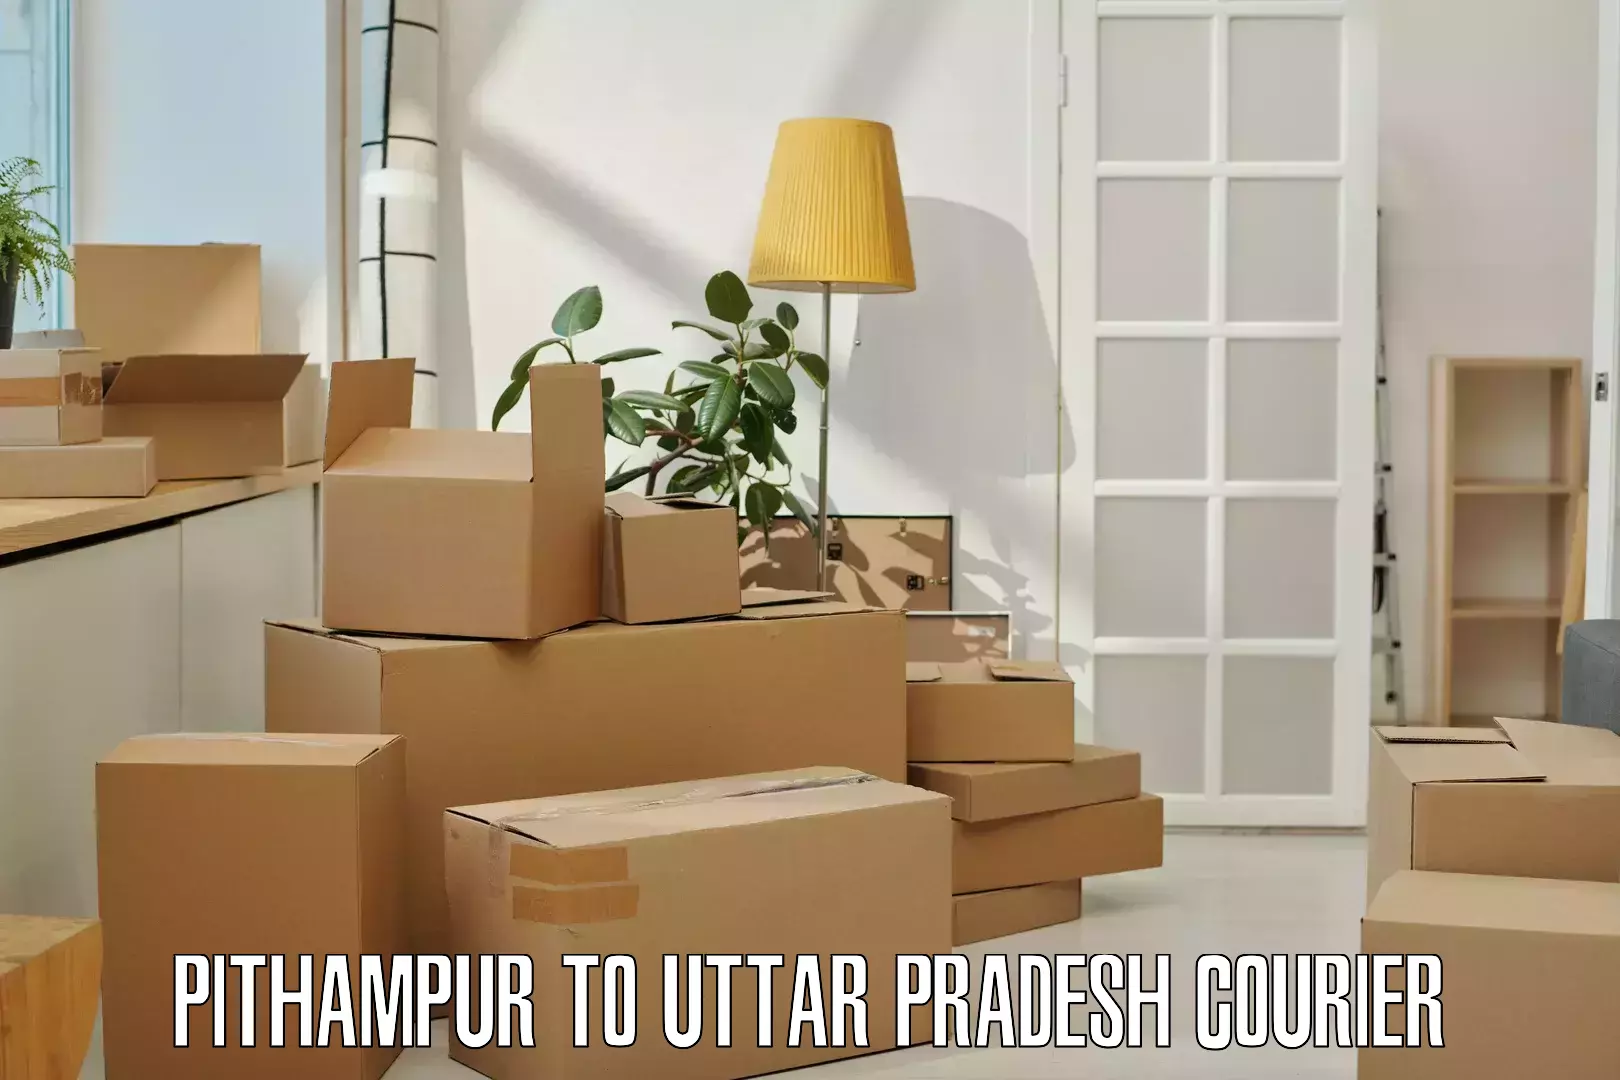 Professional courier handling Pithampur to Aligarh